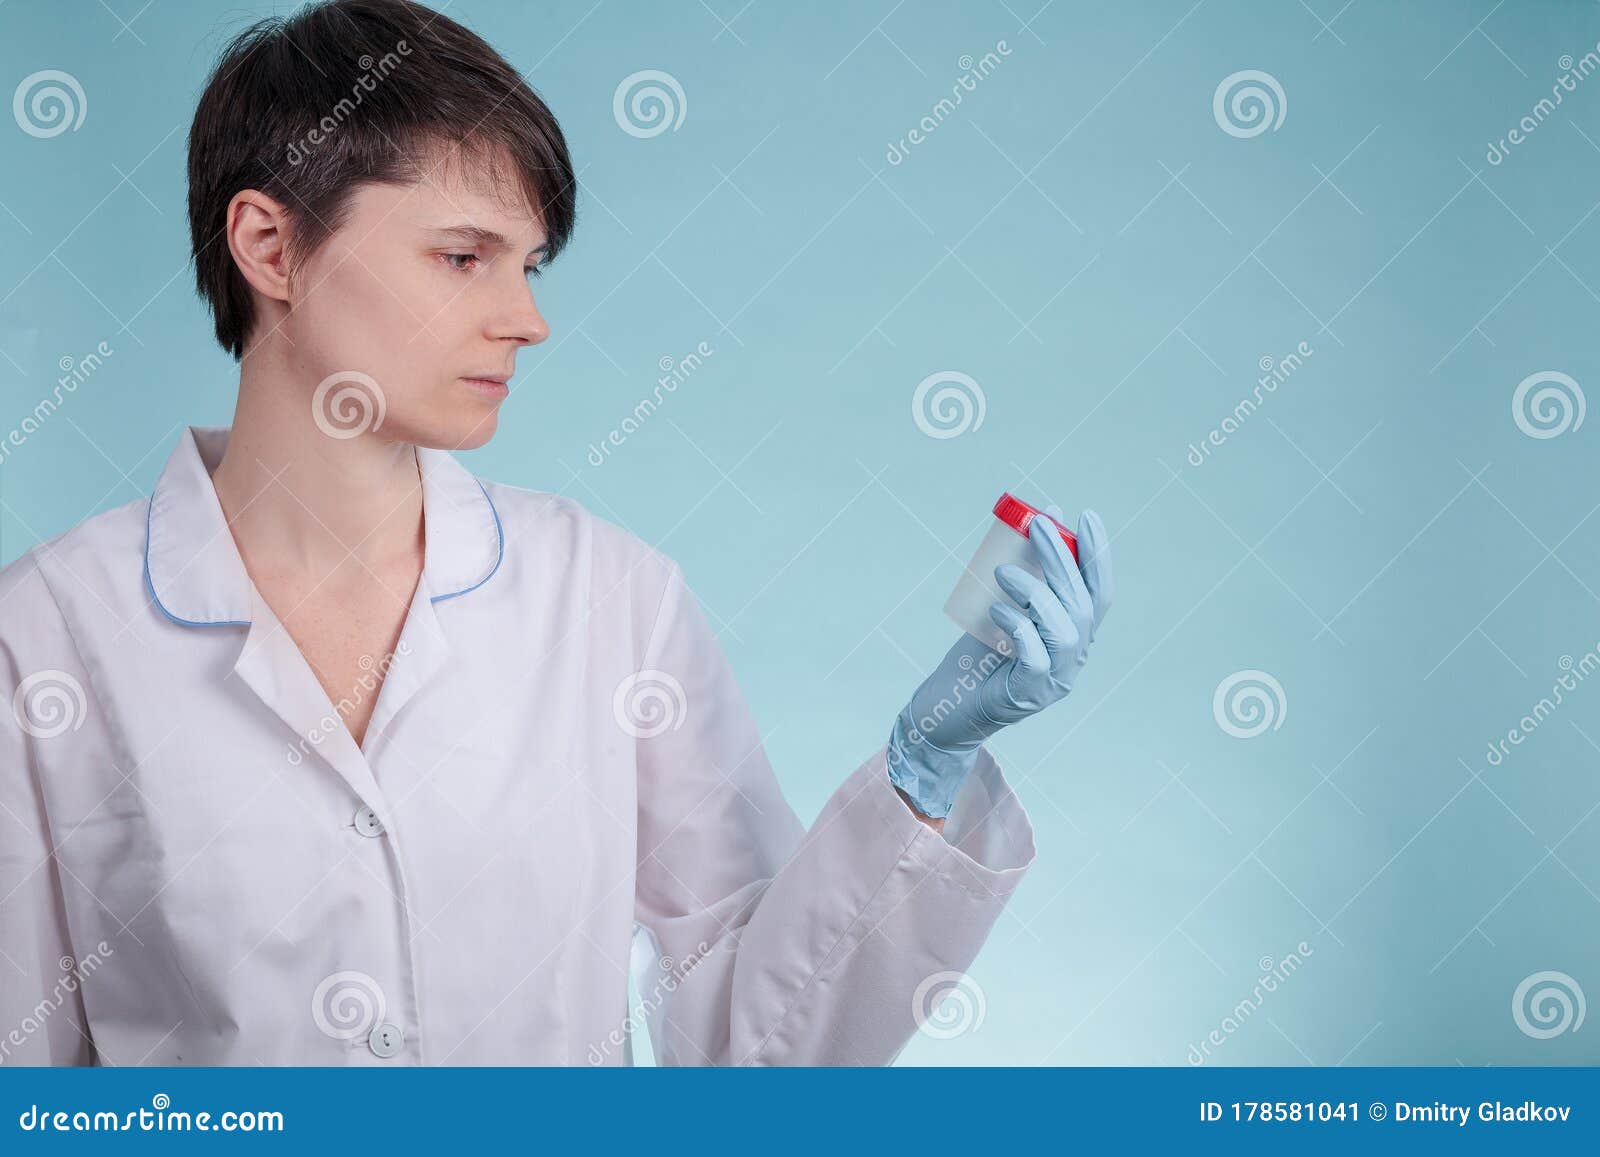 Portrait Of A Young Doctors Girl Who Looks At Urine Tube As A Concept